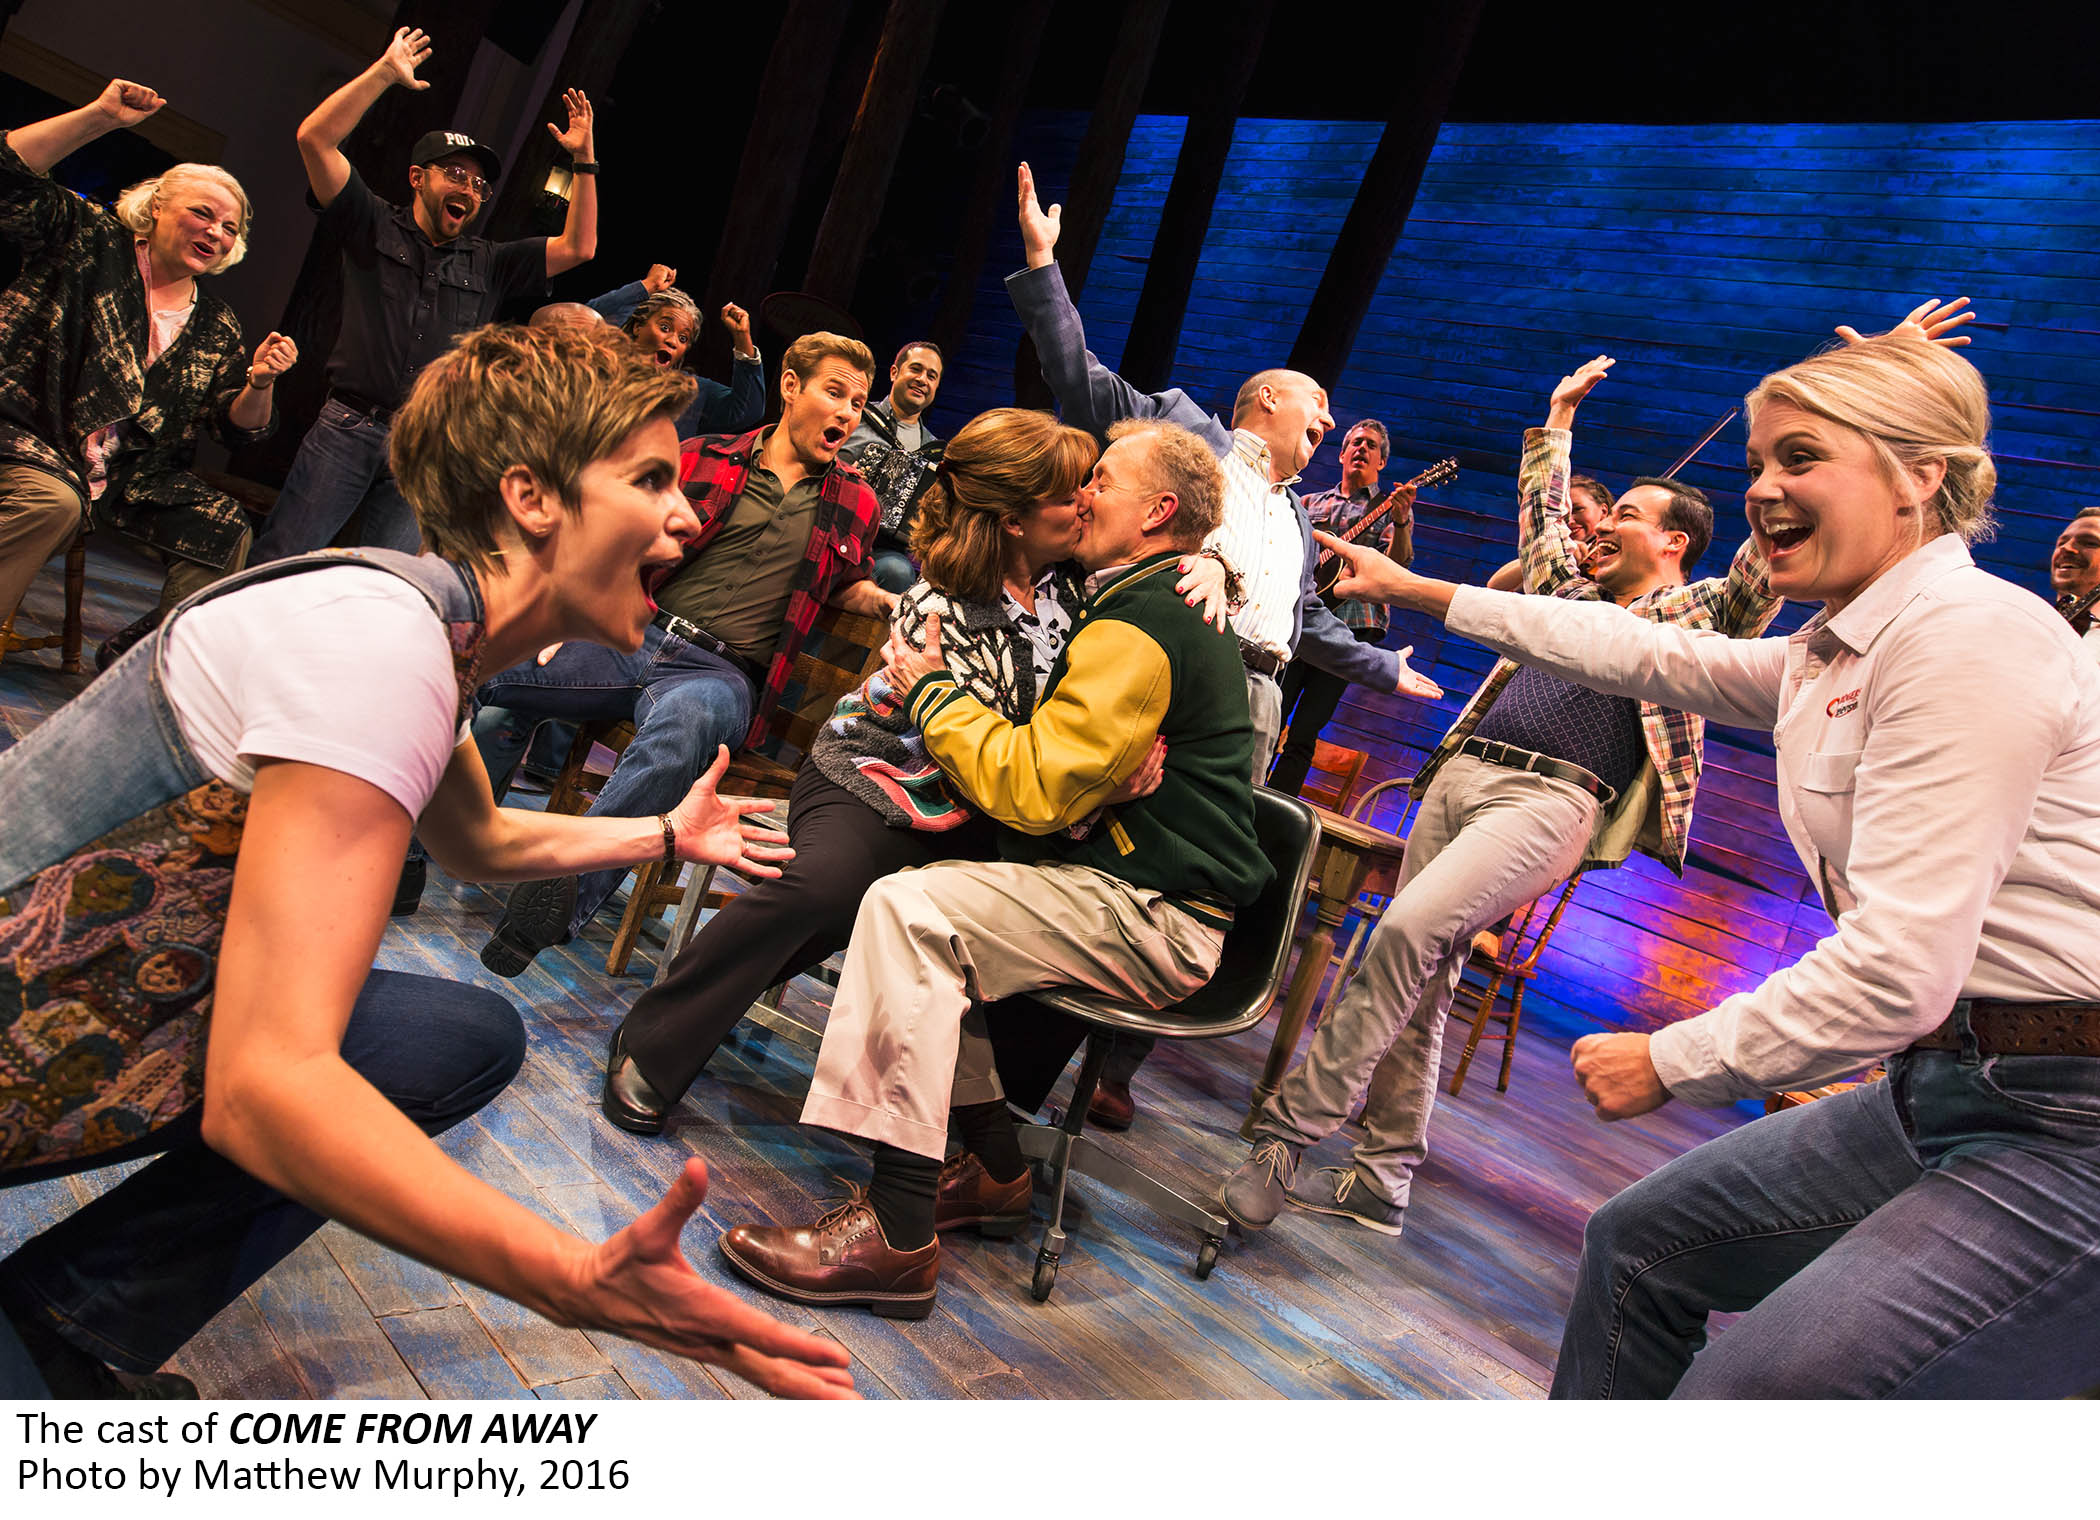 [3]_The cast of COME FROM AWAY, Photo by Matthew Murphy, 2016